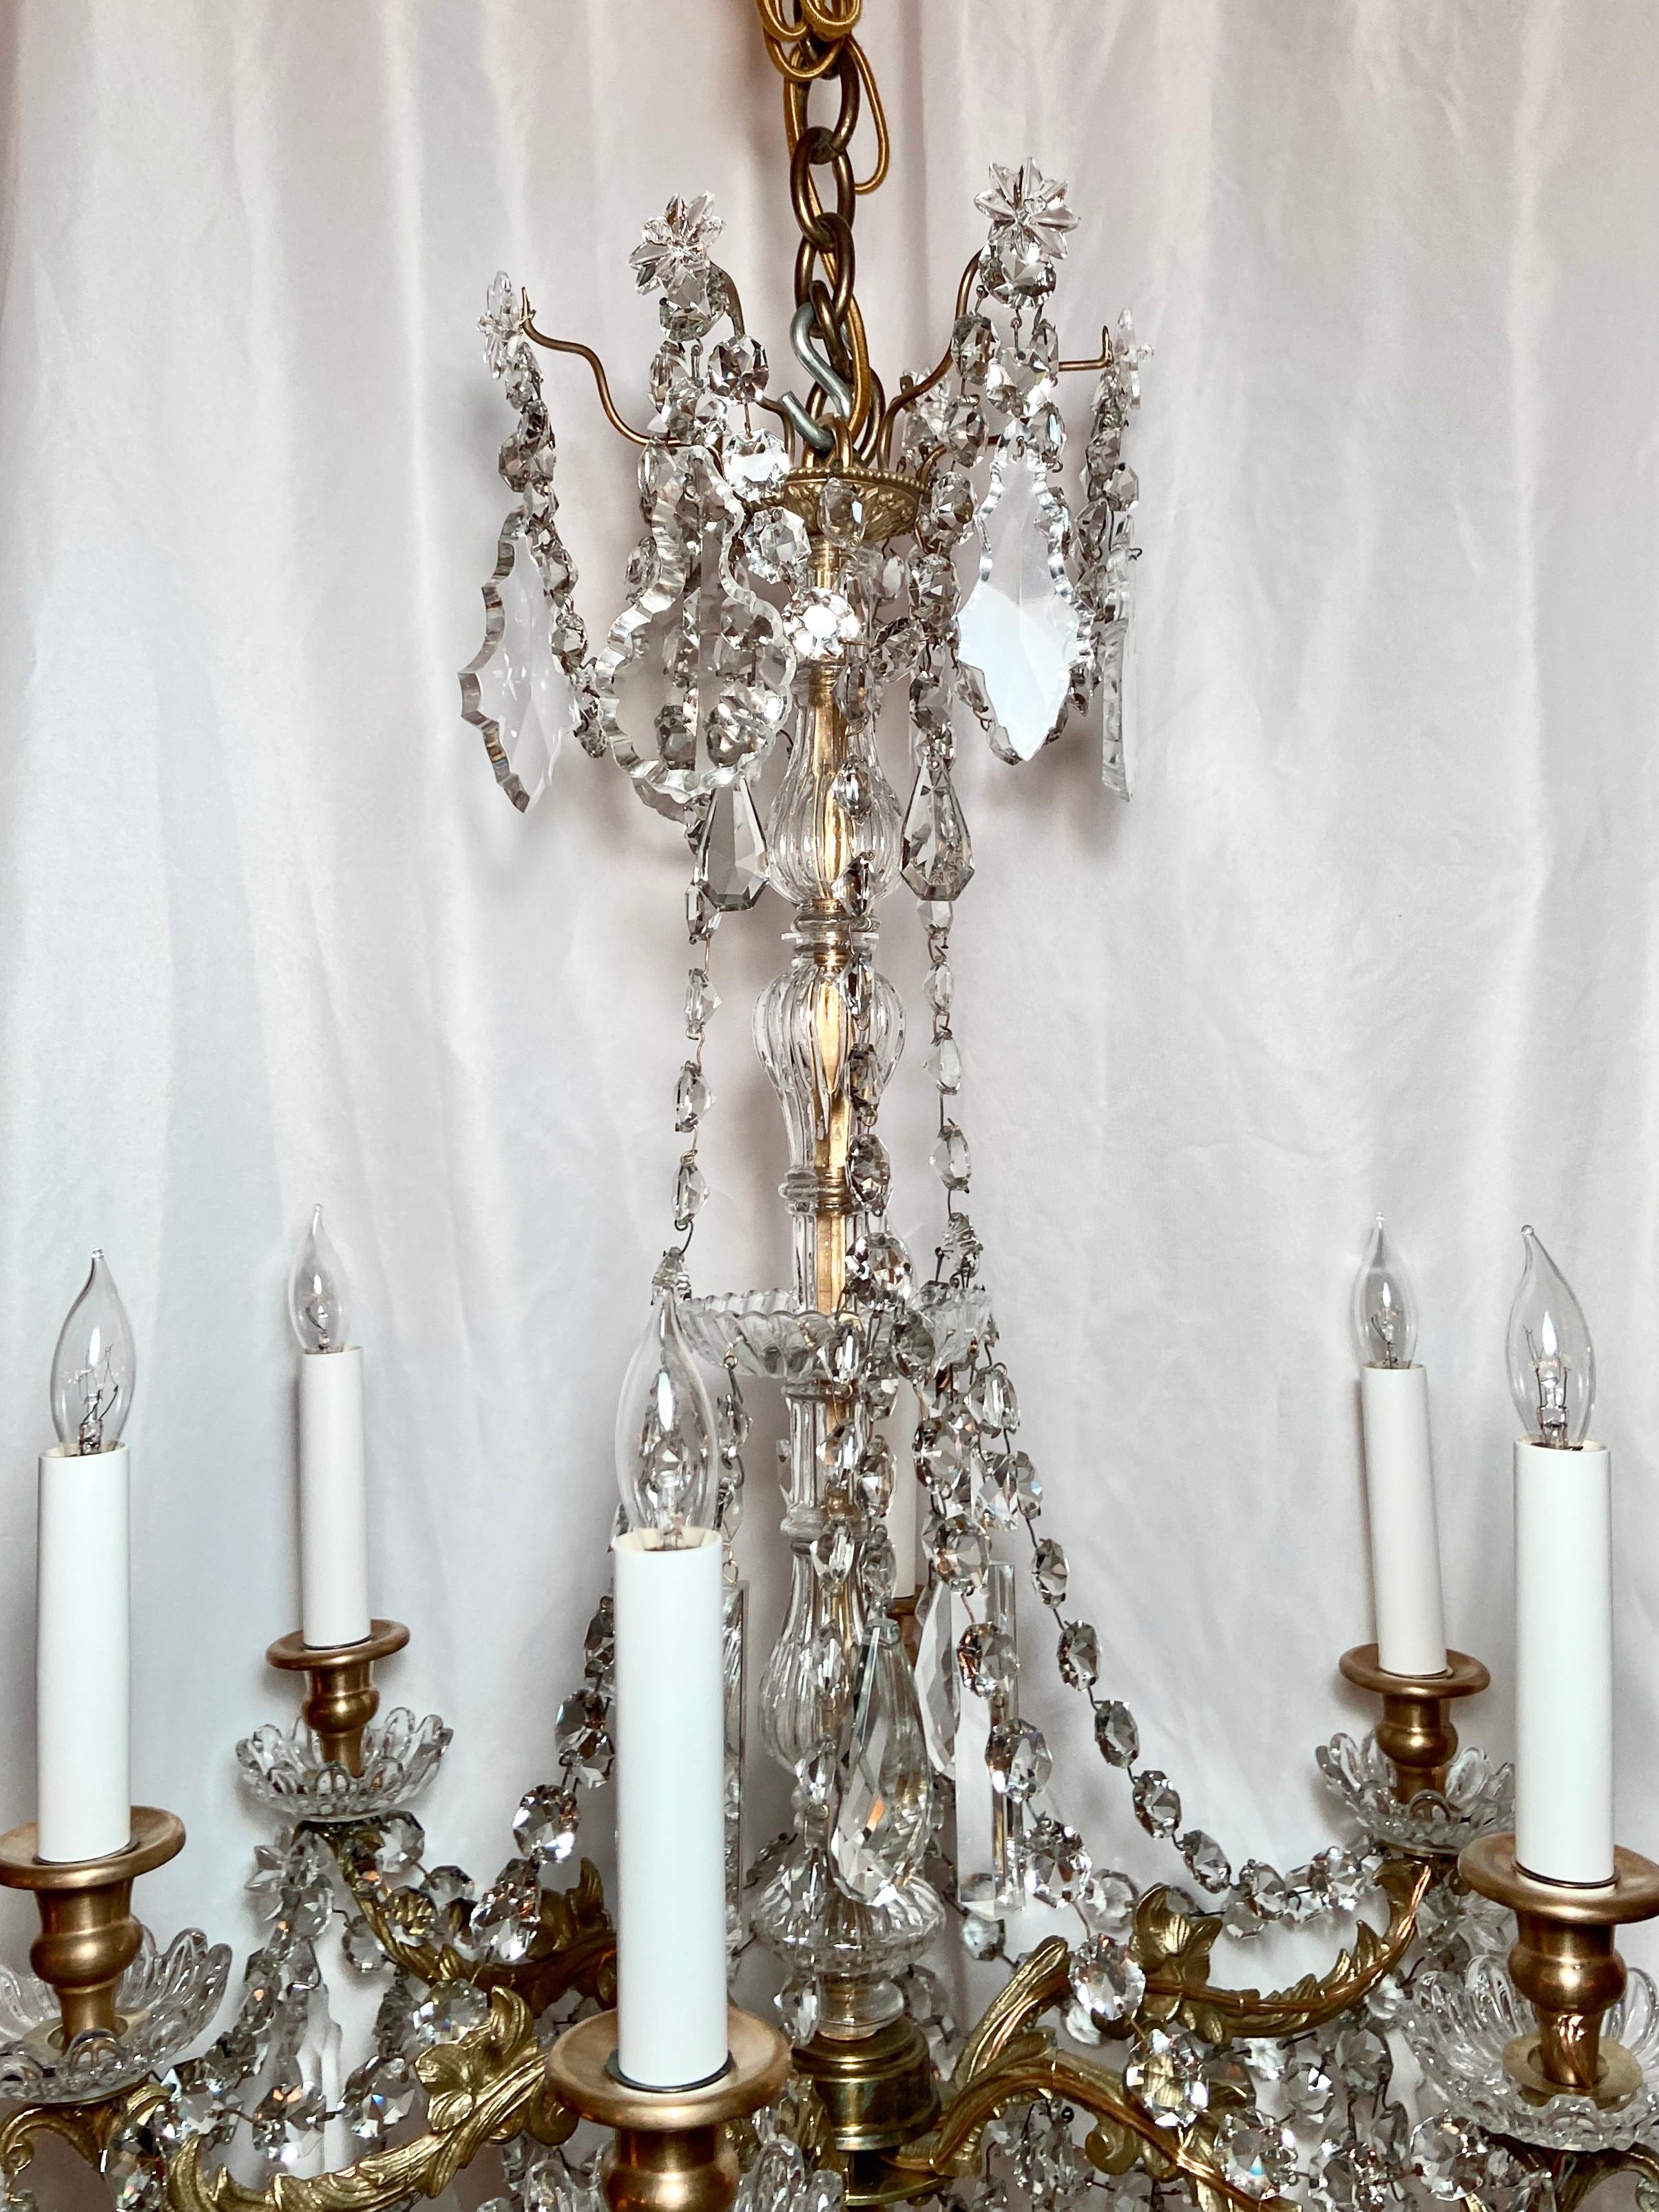 Antique French gold bronze and Baccarat crystal six light chandelier, Circa 1890.